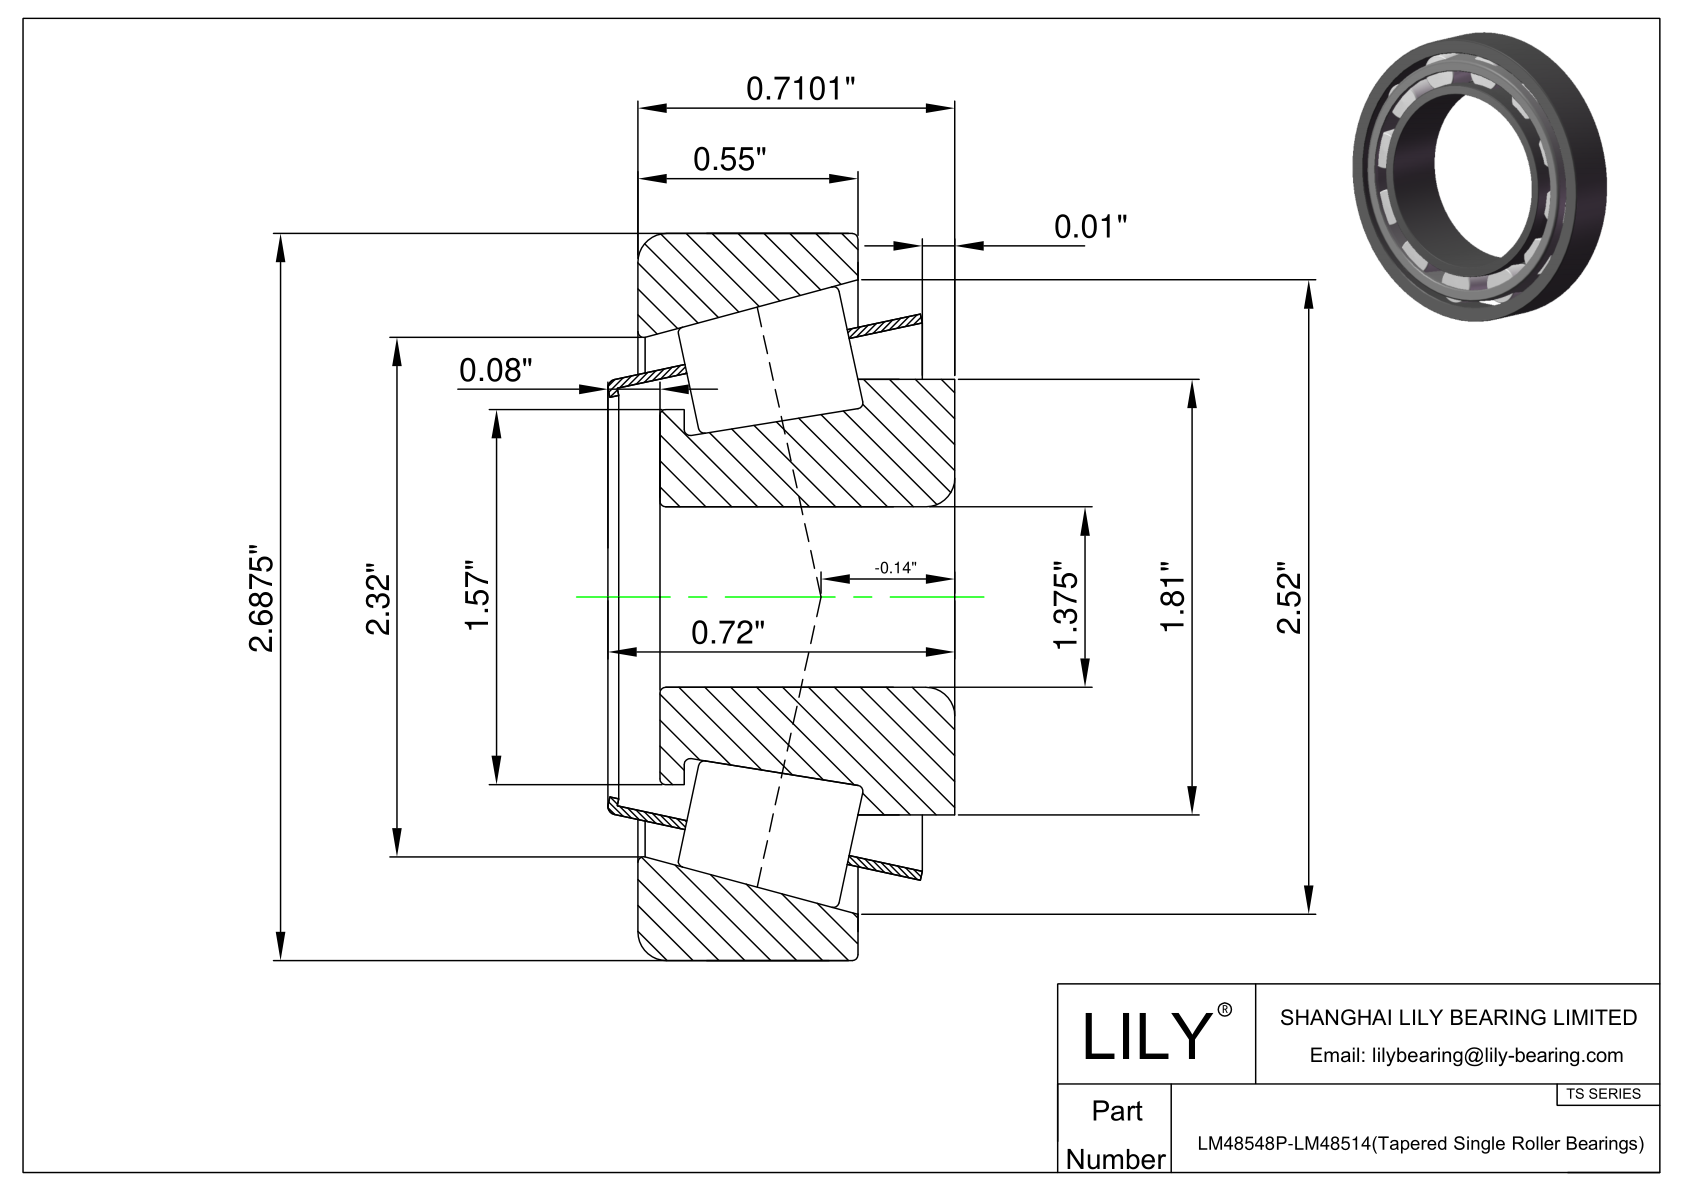 LM48548P-LM48514 TS (Tapered Single Roller Bearings) (Imperial) cad drawing